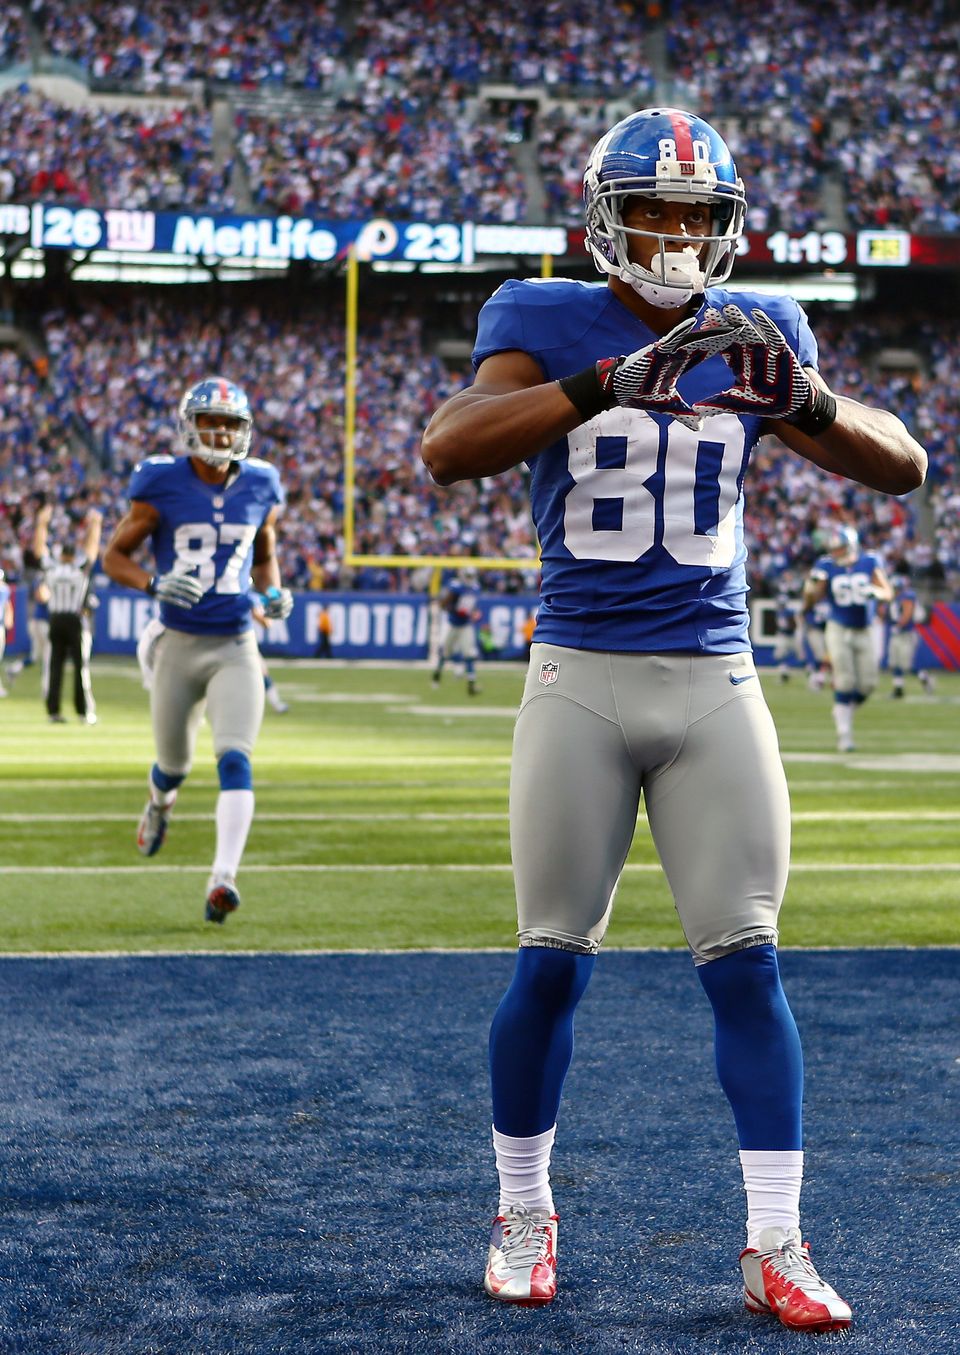 <a href="http://www.nationalfootballpost.com/The-most-underpaid-players-in-the-NFL.html" target="_hplink" role="link" class=" js-entry-link cet-external-link" data-vars-item-name="Victor Cruz (WR)-New York Giants: " data-vars-item-type="text" data-vars-unit-name="5bb6bf8ce4b097869fd2a5a0" data-vars-unit-type="buzz_body" data-vars-target-content-id="http://www.nationalfootballpost.com/The-most-underpaid-players-in-the-NFL.html" data-vars-target-content-type="url" data-vars-type="web_external_link" data-vars-subunit-name="before_you_go_slideshow" data-vars-subunit-type="component" data-vars-position-in-subunit="9">Victor Cruz (WR)-New York Giants: </a>